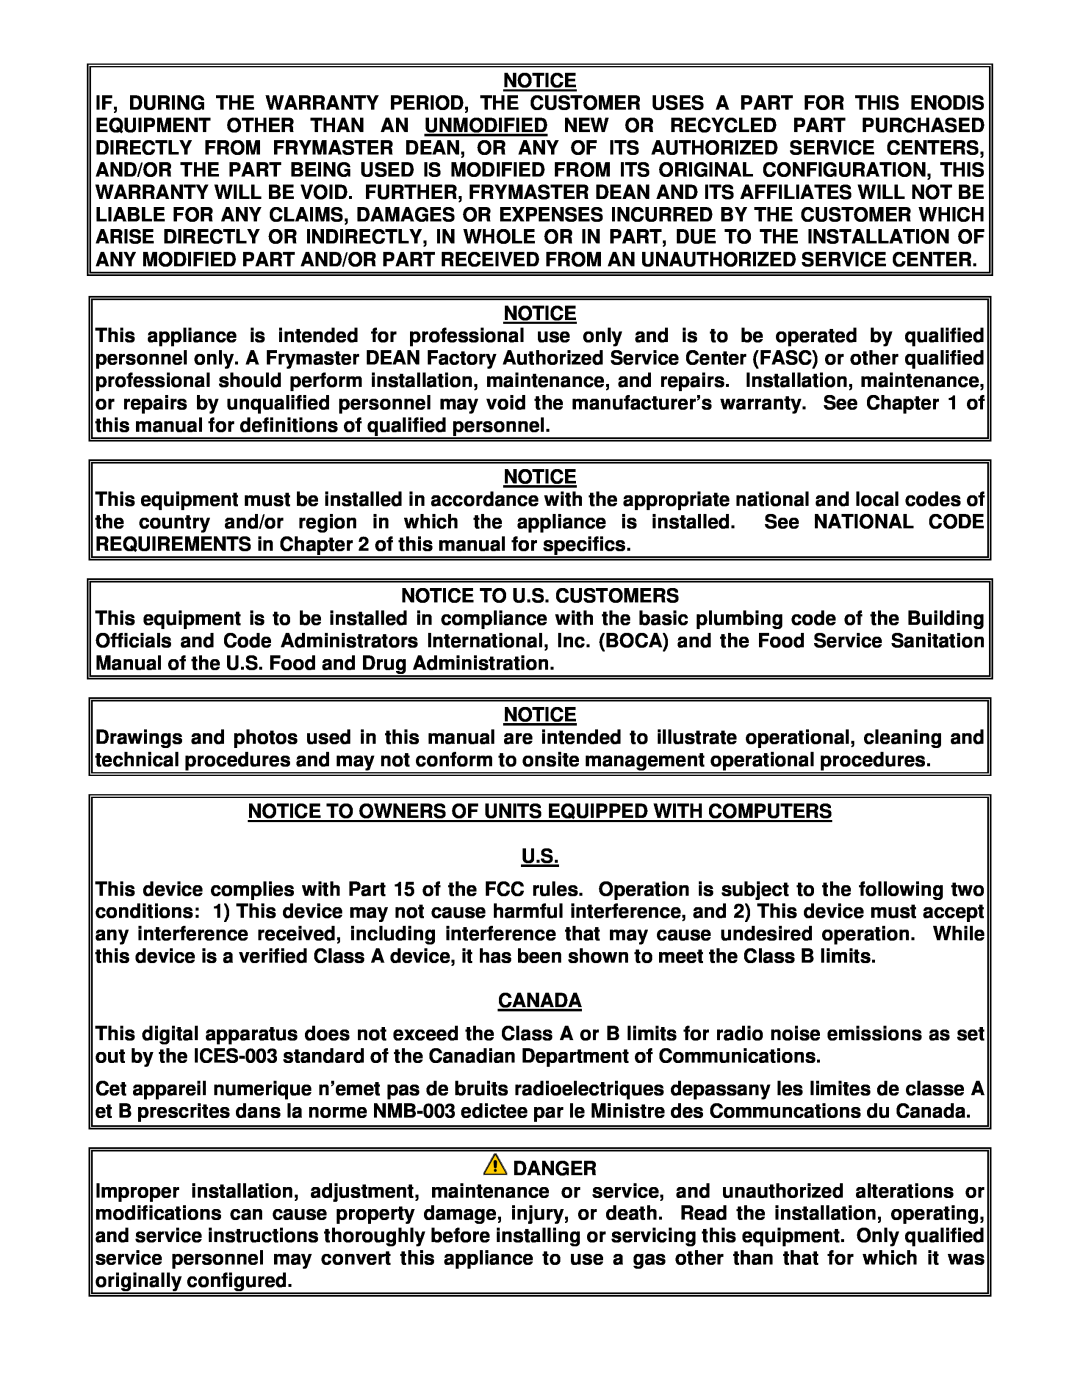 Frymaster H50 manual Notice To U.S. Customers, Notice To Owners Of Units Equipped With Computers, Canada, Danger 